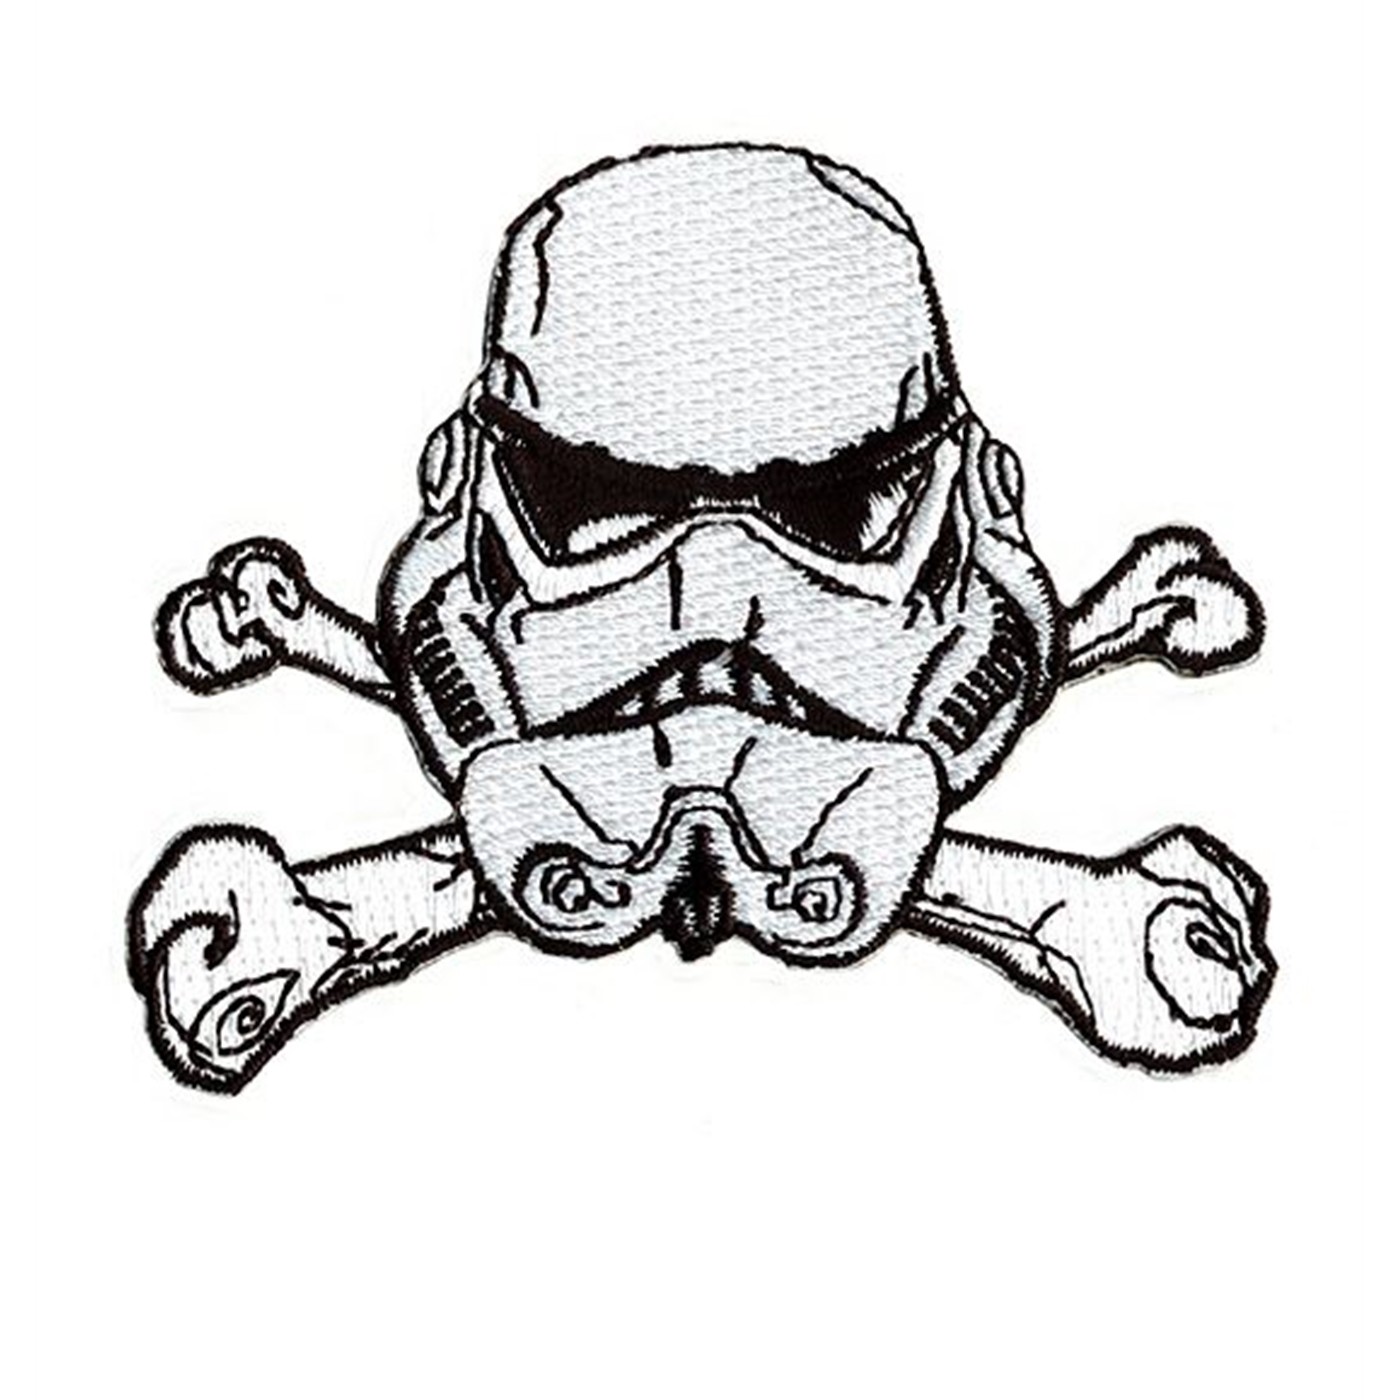 Star Wars Stormtrooper Jolly Roger Patch